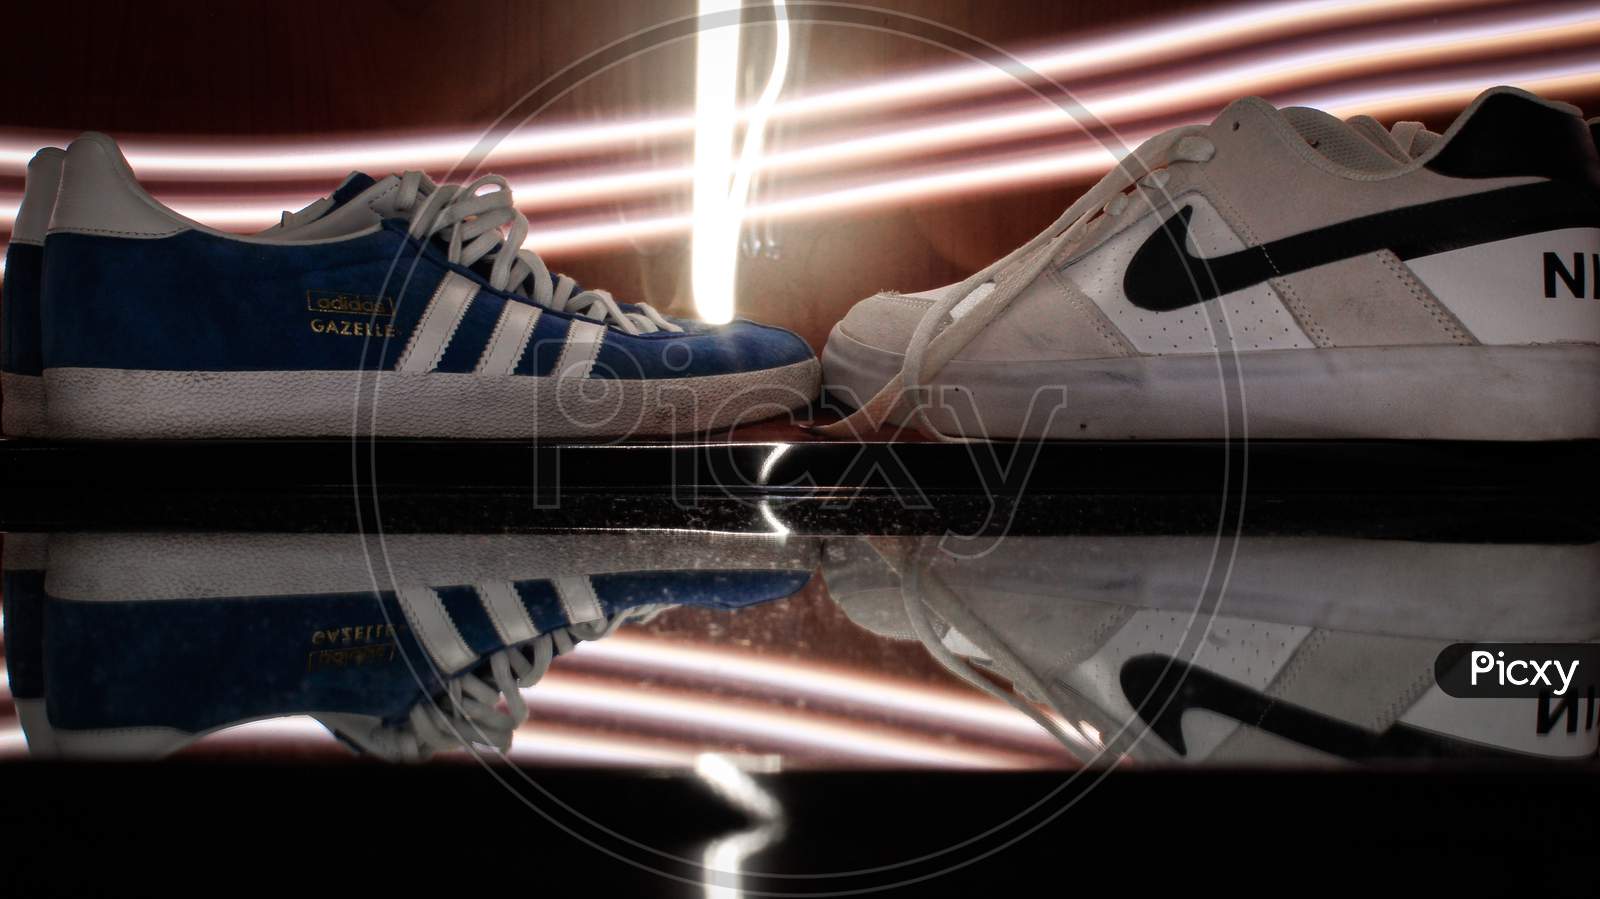 Blue And White Adidas Gazelle Suede Fashion Shoes And Fancy White, Blue And Gray Nike Sb Fashion Shoes